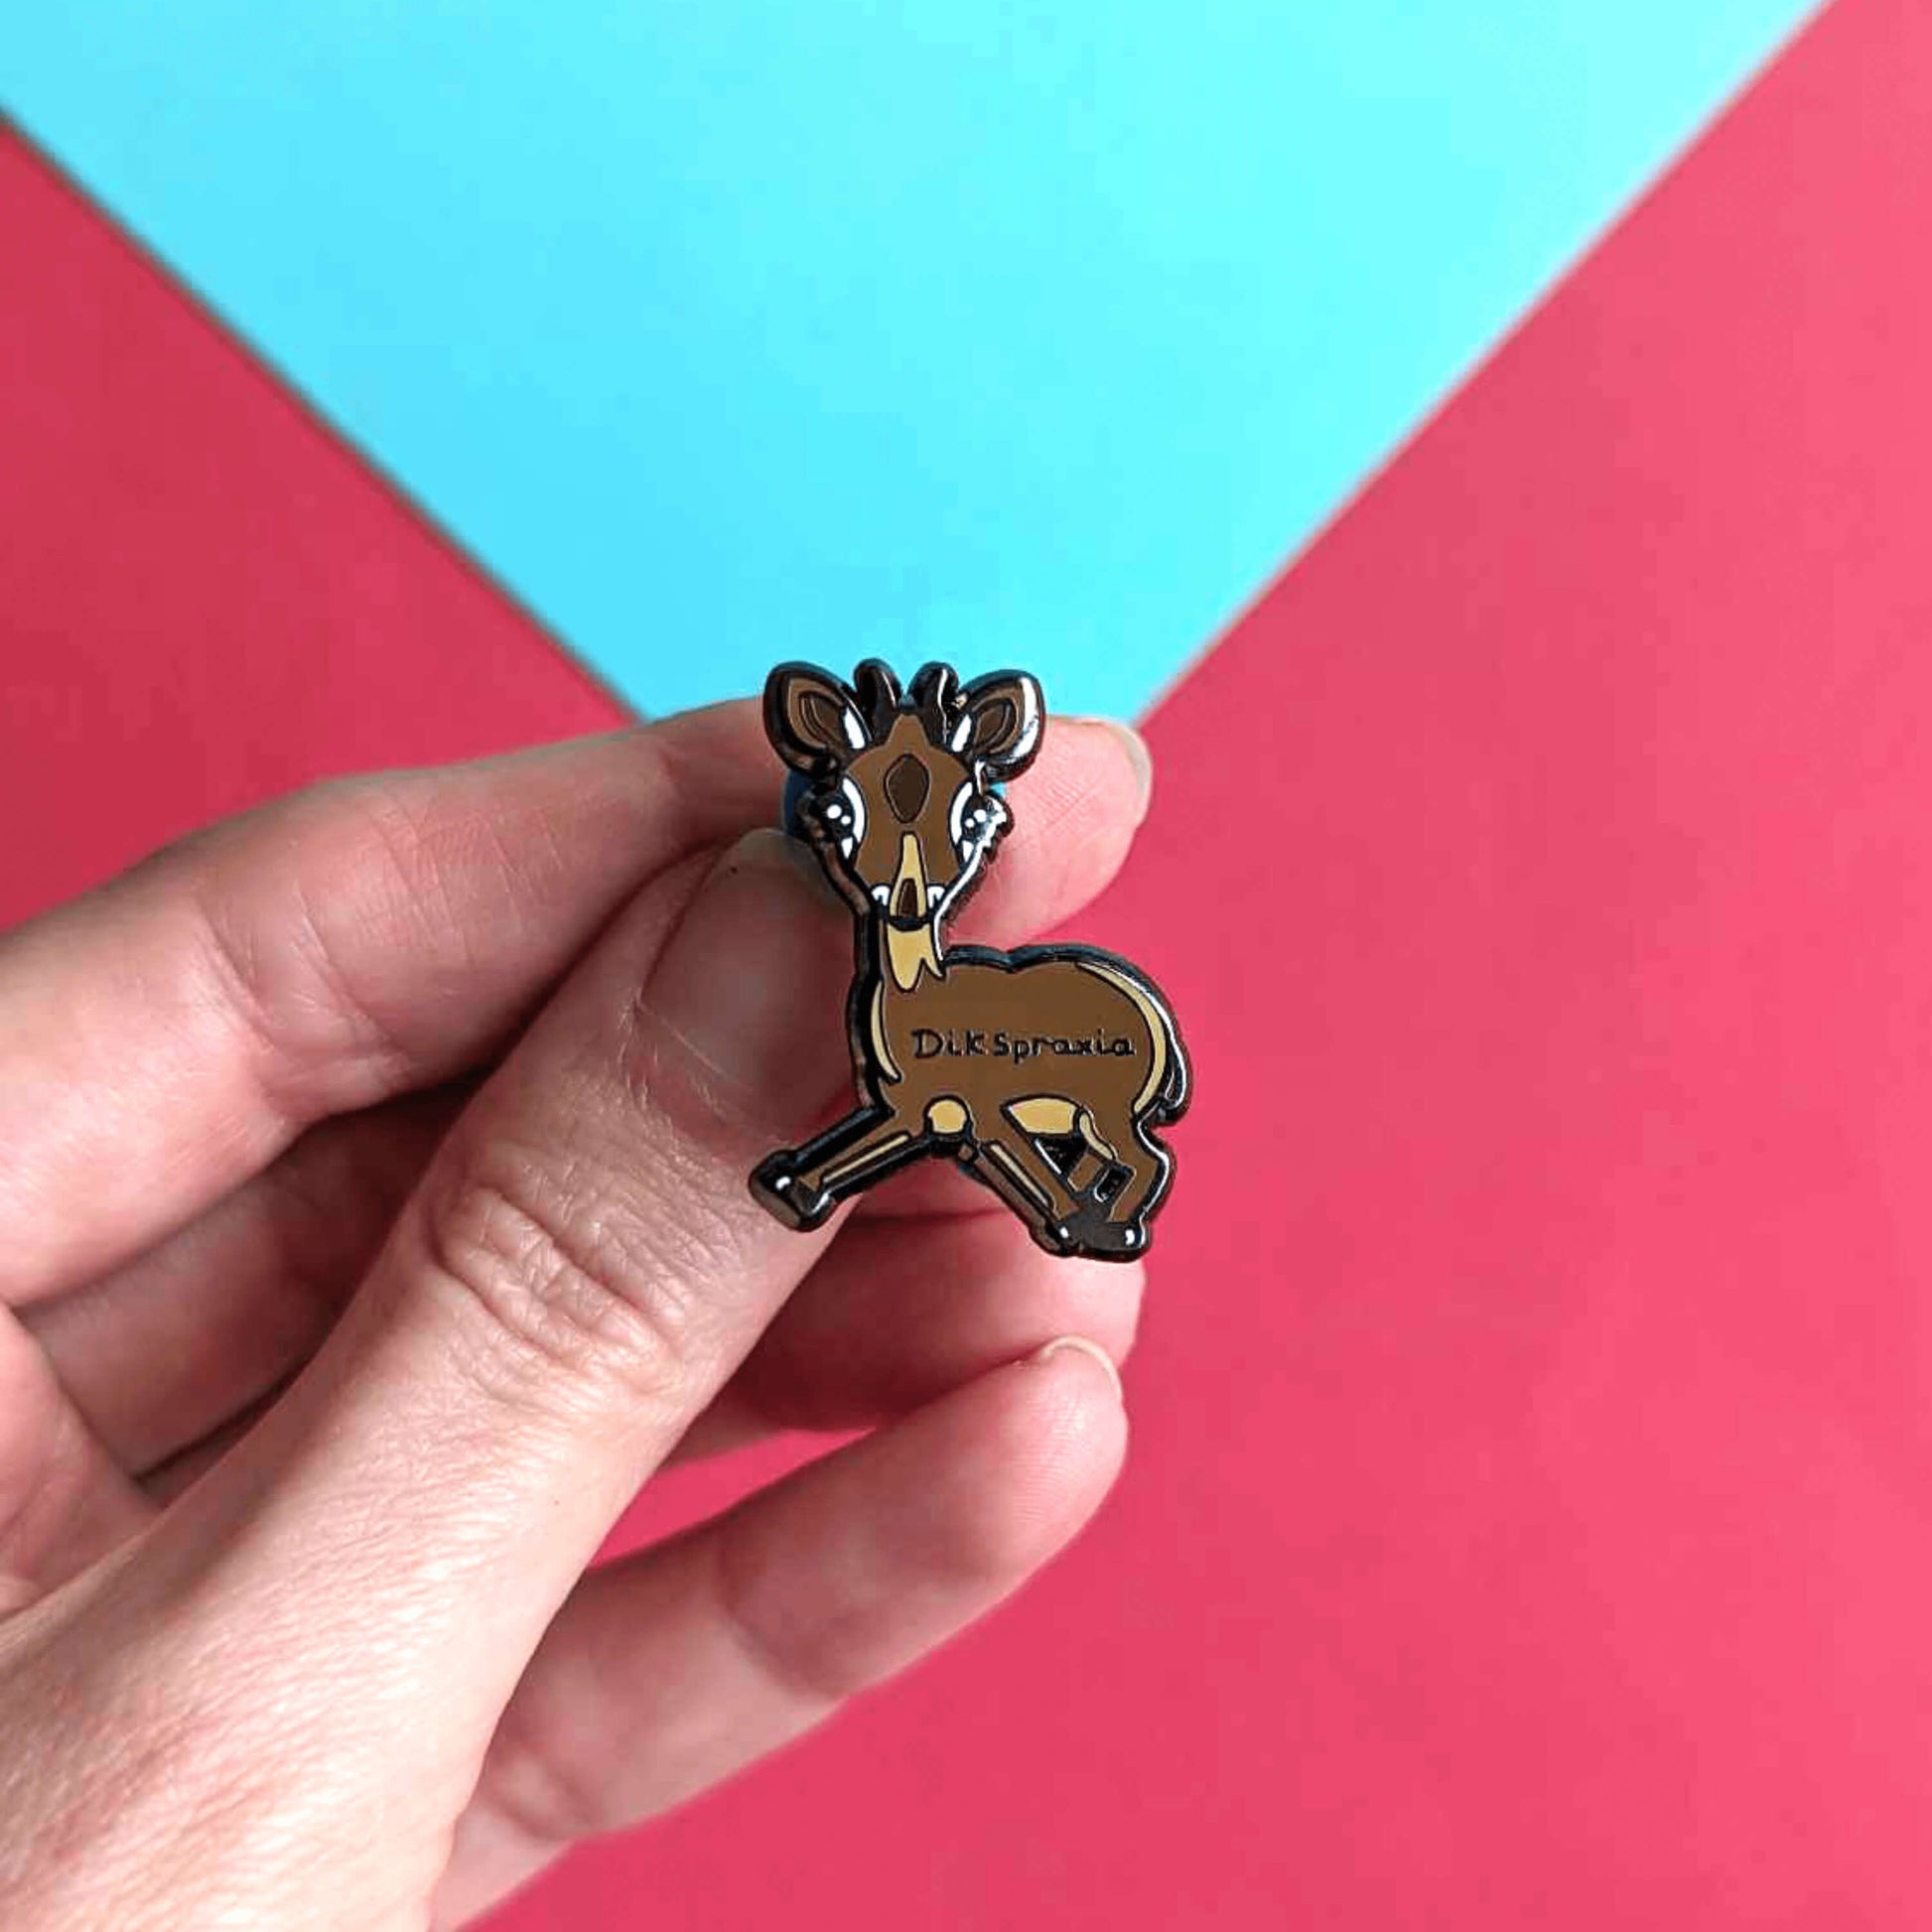 The Dikspraxia Enamel Pin - Dyspraxia being held up over a red and blue background. The brown dik dik antelope shaped enamel pin has its two front legs splayed chaotically with black text reading 'dikspraxia' across its middle. The design is raising awareness for dyspraxia and neurodivergence.